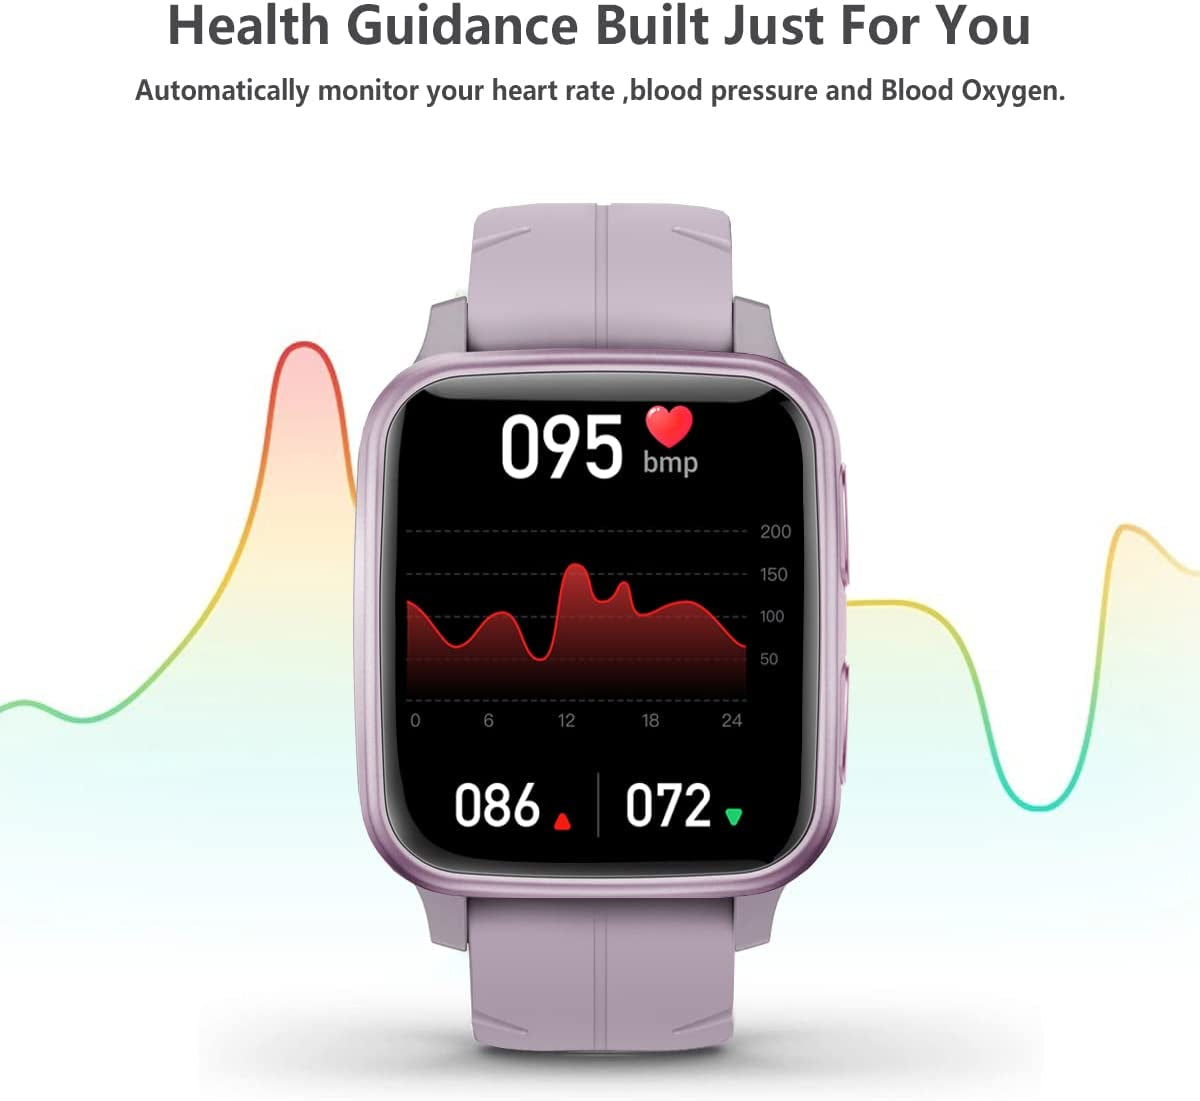 Smart Fitness Tracker with Advanced Health Monitoring Features, Sleep Tracking, Step Counting, and Waterproof Design for Android and iOS - Suitable for Women and Men